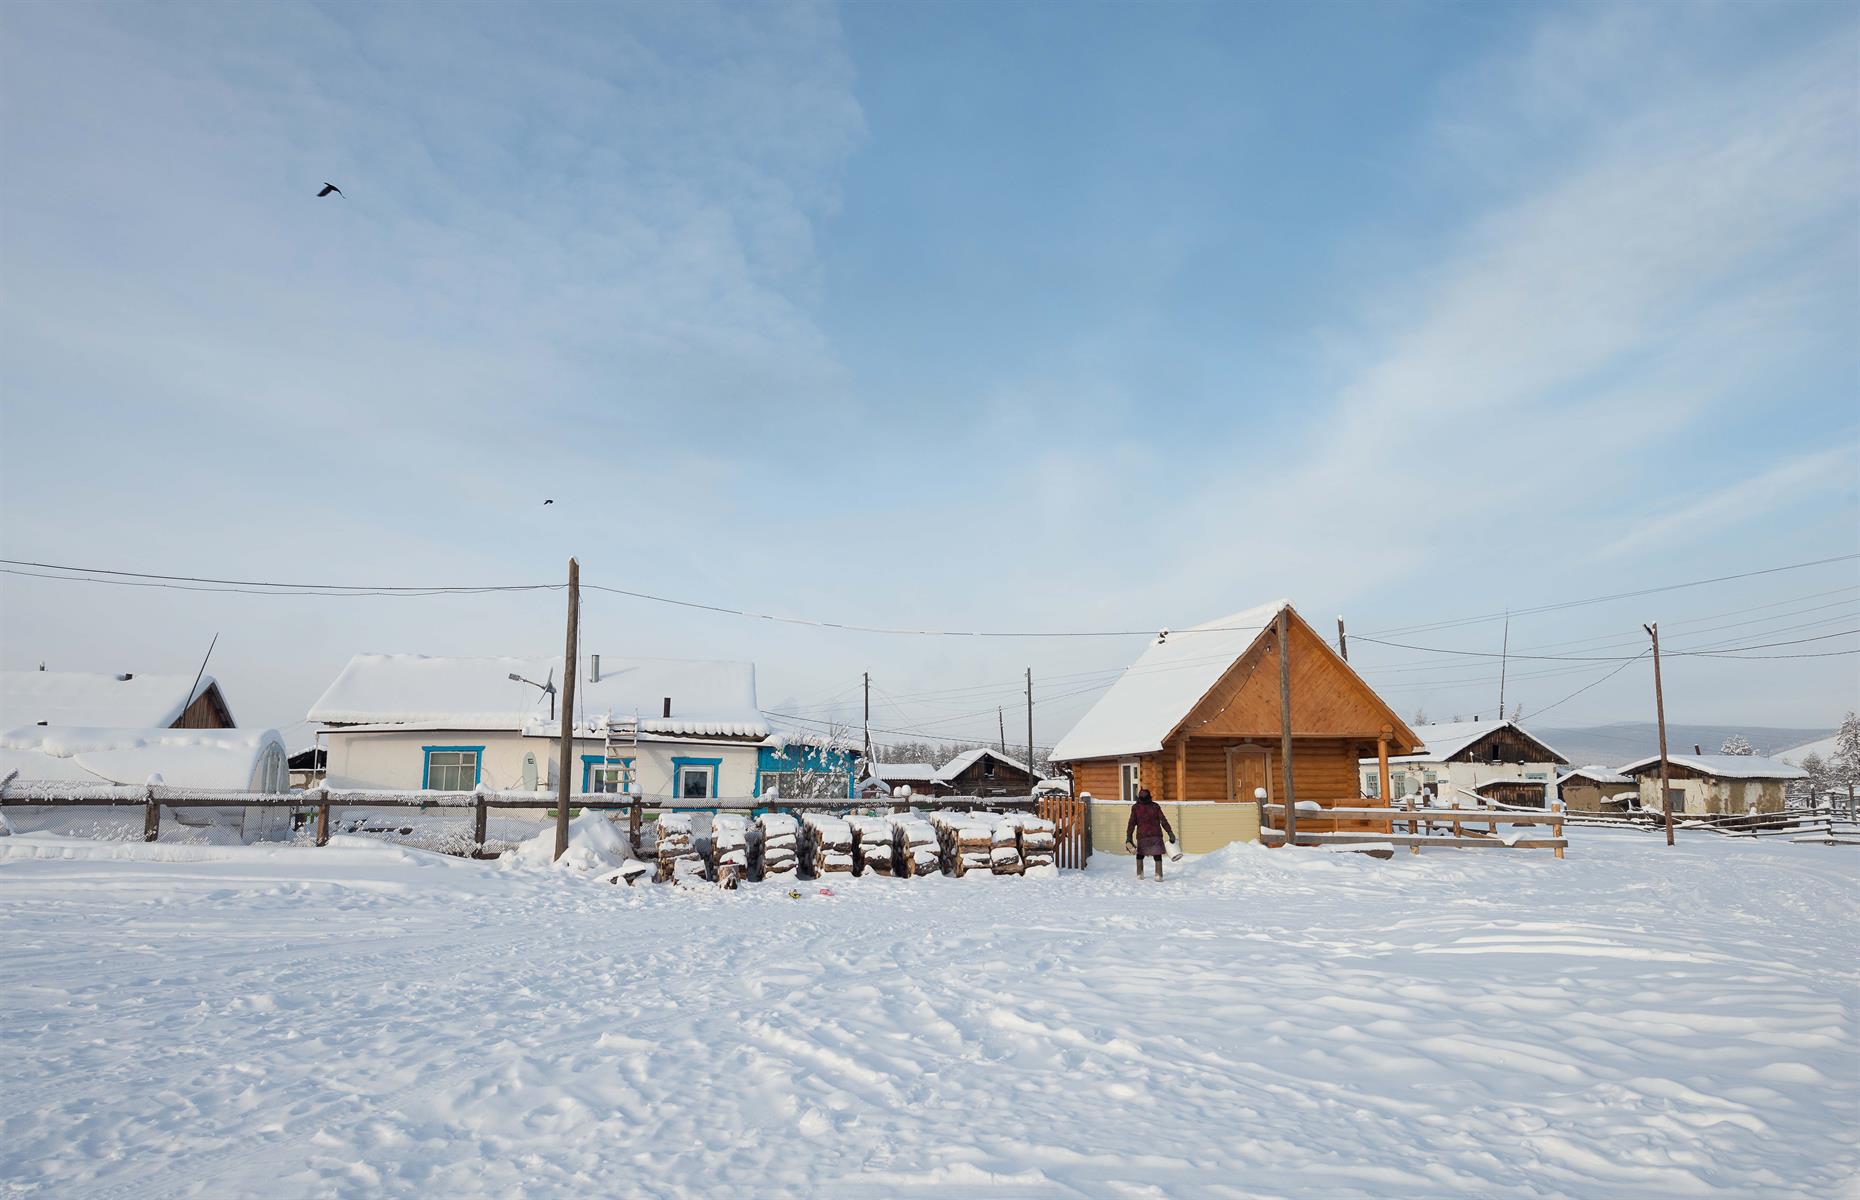 Most residents live off high-protein foods including raw frozen fish, reindeer meat and ice cubes of horse blood to get their nutrients. There are no conveniences in town due to the remote location and in the freezing weather, even pen ink freezes.